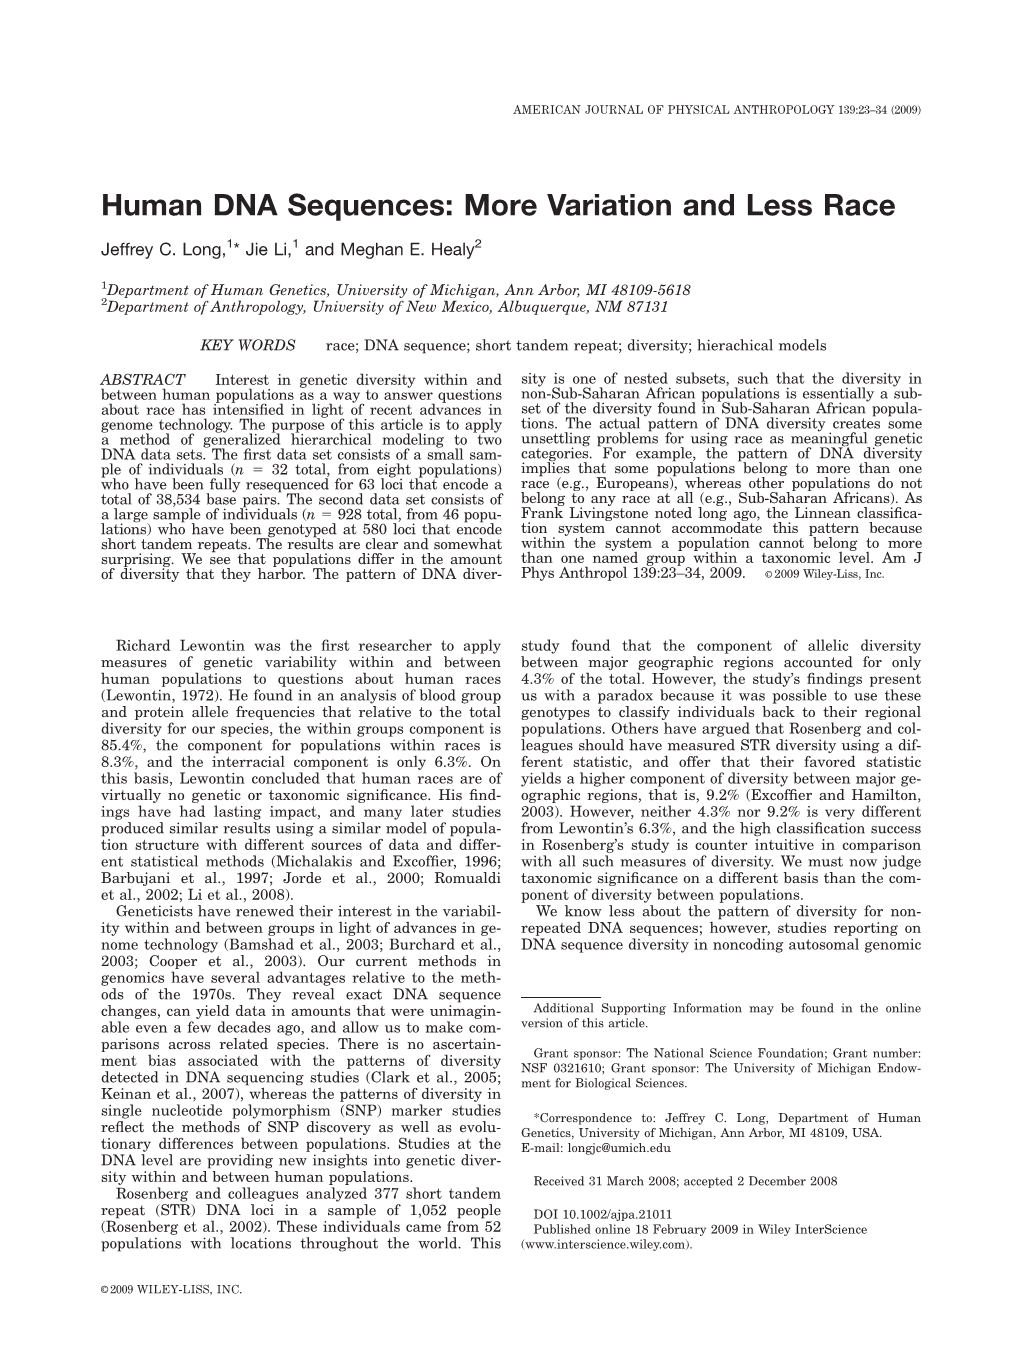 Human DNA Sequences: More Variation and Less Race